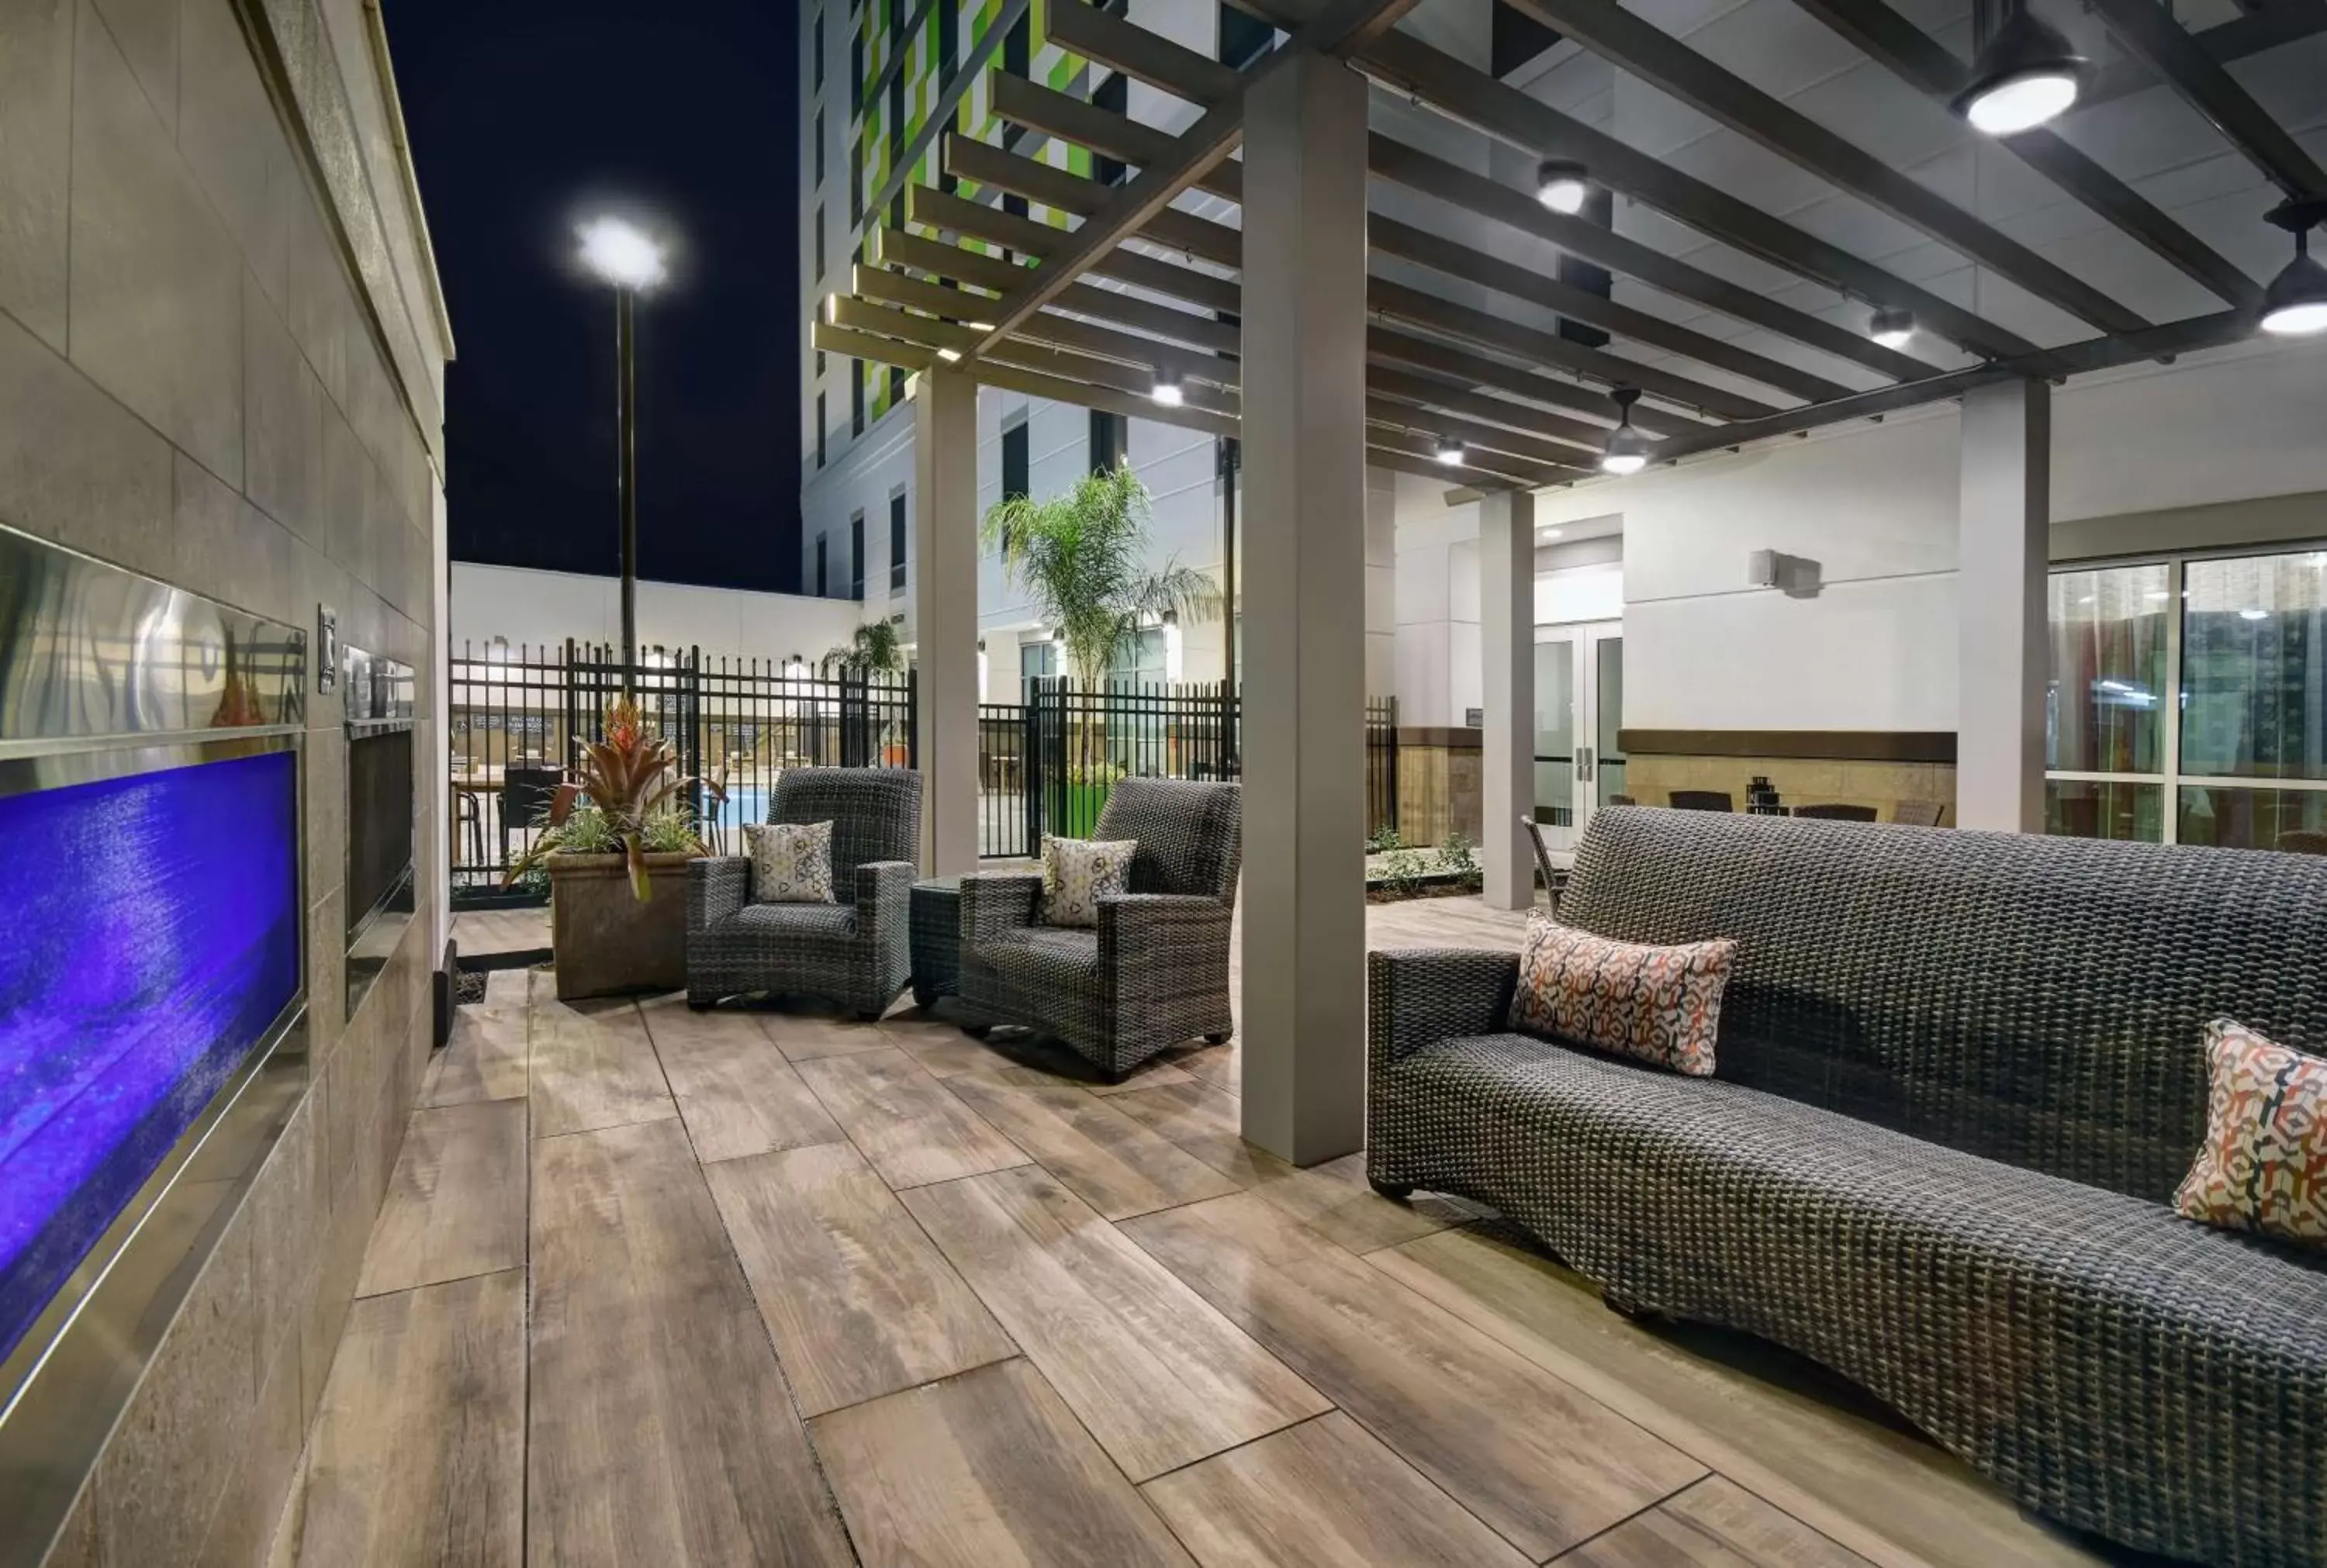 Patio, Swimming Pool in Home2 Suites by Hilton Houston Medical Center, TX